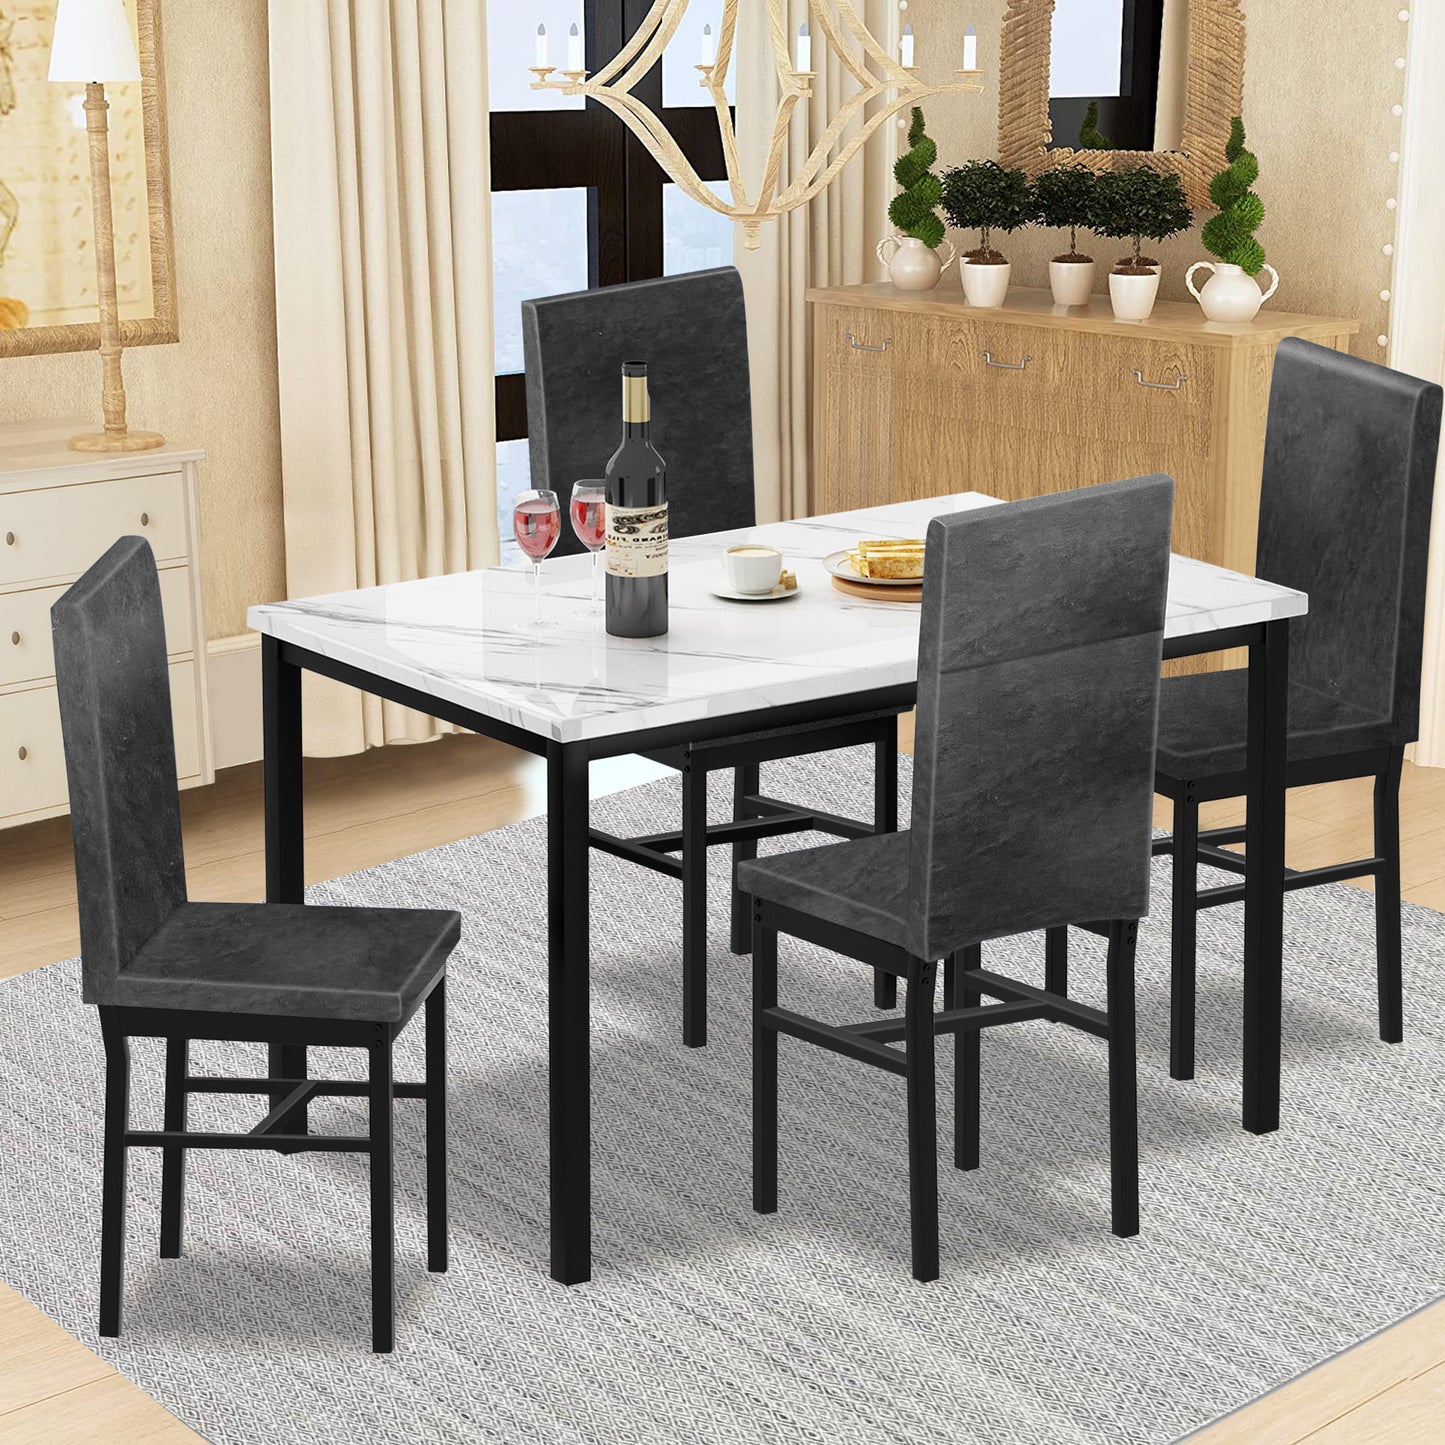 SYNGAR 5 Piece Dining Set, Modern Dining Table and Chairs Set for 4, Kitchen Dining Table Set with Faux Marble Tabletop & 4 PU Leather Upholstered Chairs, for Small Space, Breakfast Nook, White, D8532